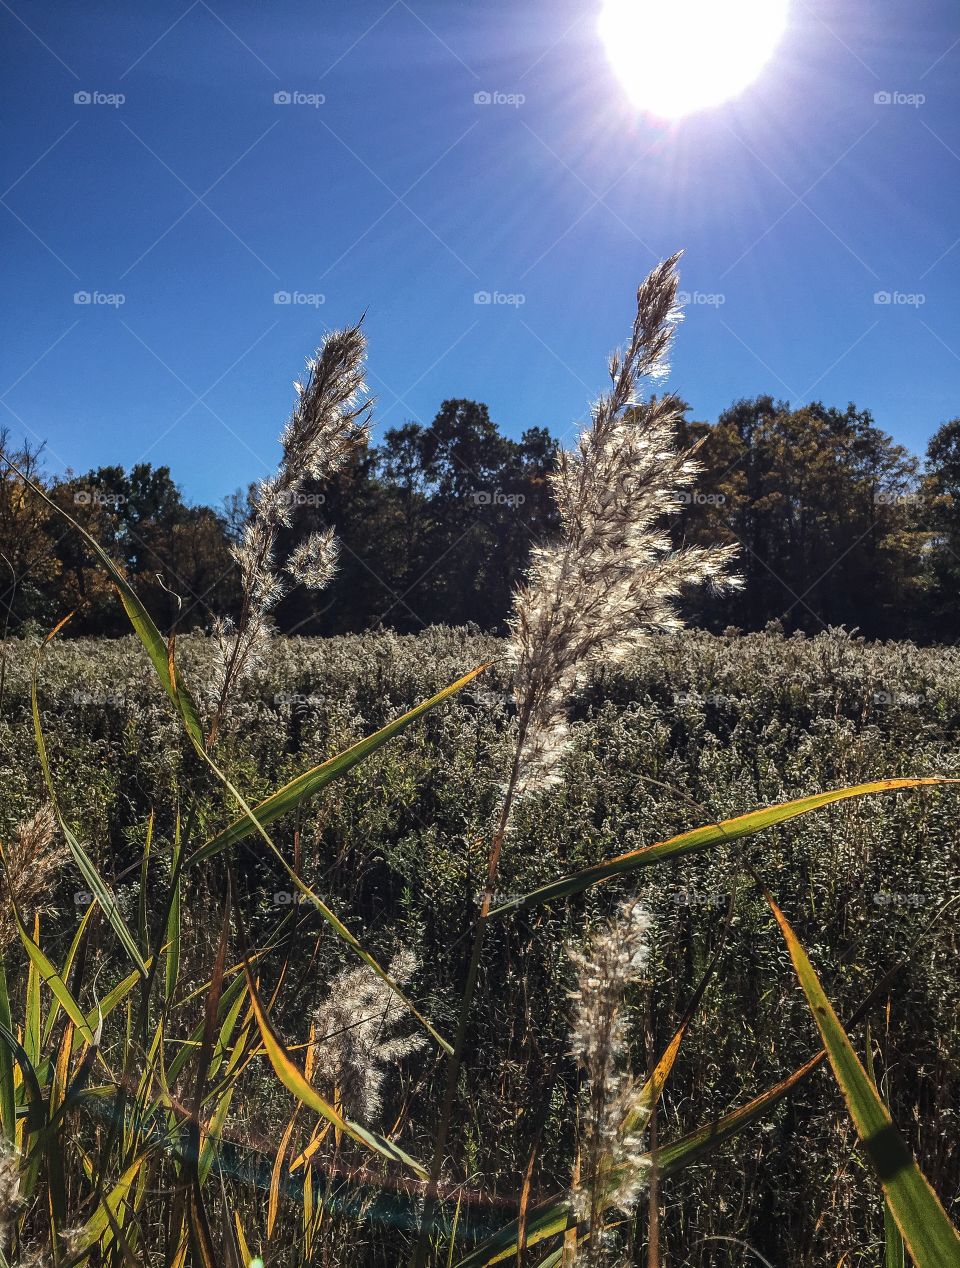 Autumn Grasses. I liked the way these grassy seed heads seemed to almost sparkle in the sunlight. 